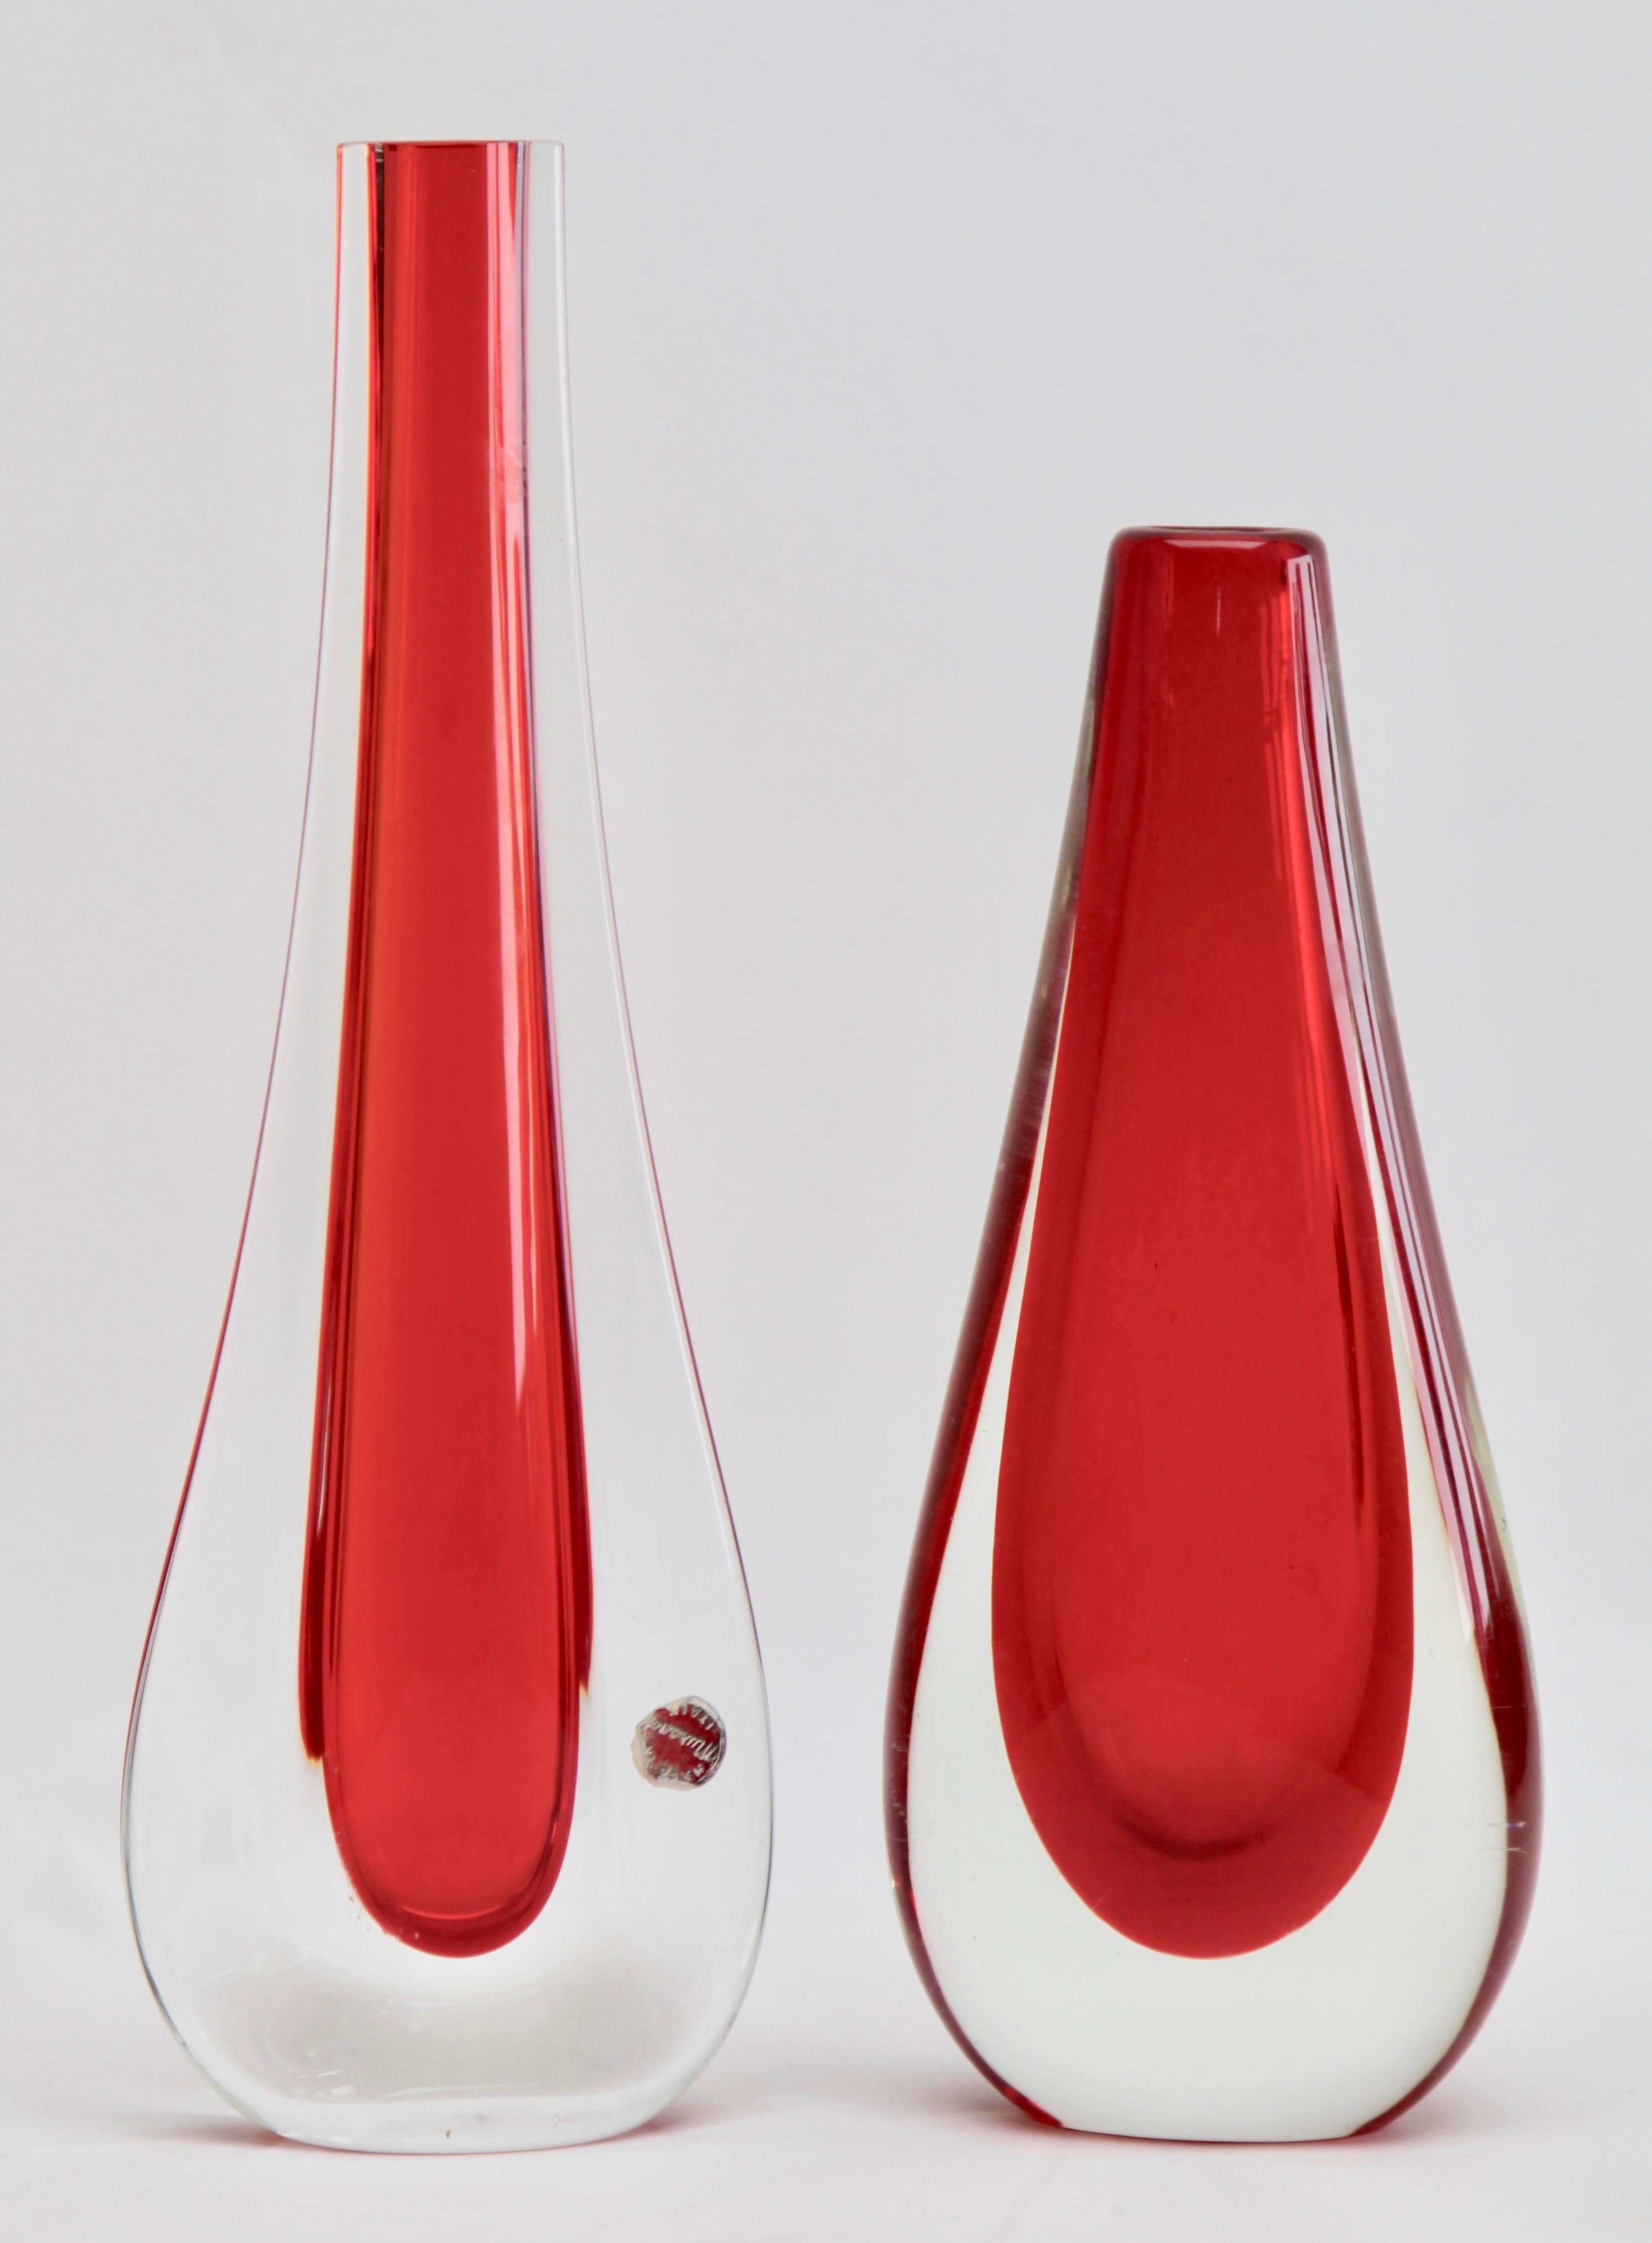 Two similar drop vases after the design by Flavio Poli each with a red core and thick Sommerso (clear glass casing).
This iconic Murano design takes a Minimalist approach to glass design and turns the focus to the skills of the master craftsmen who